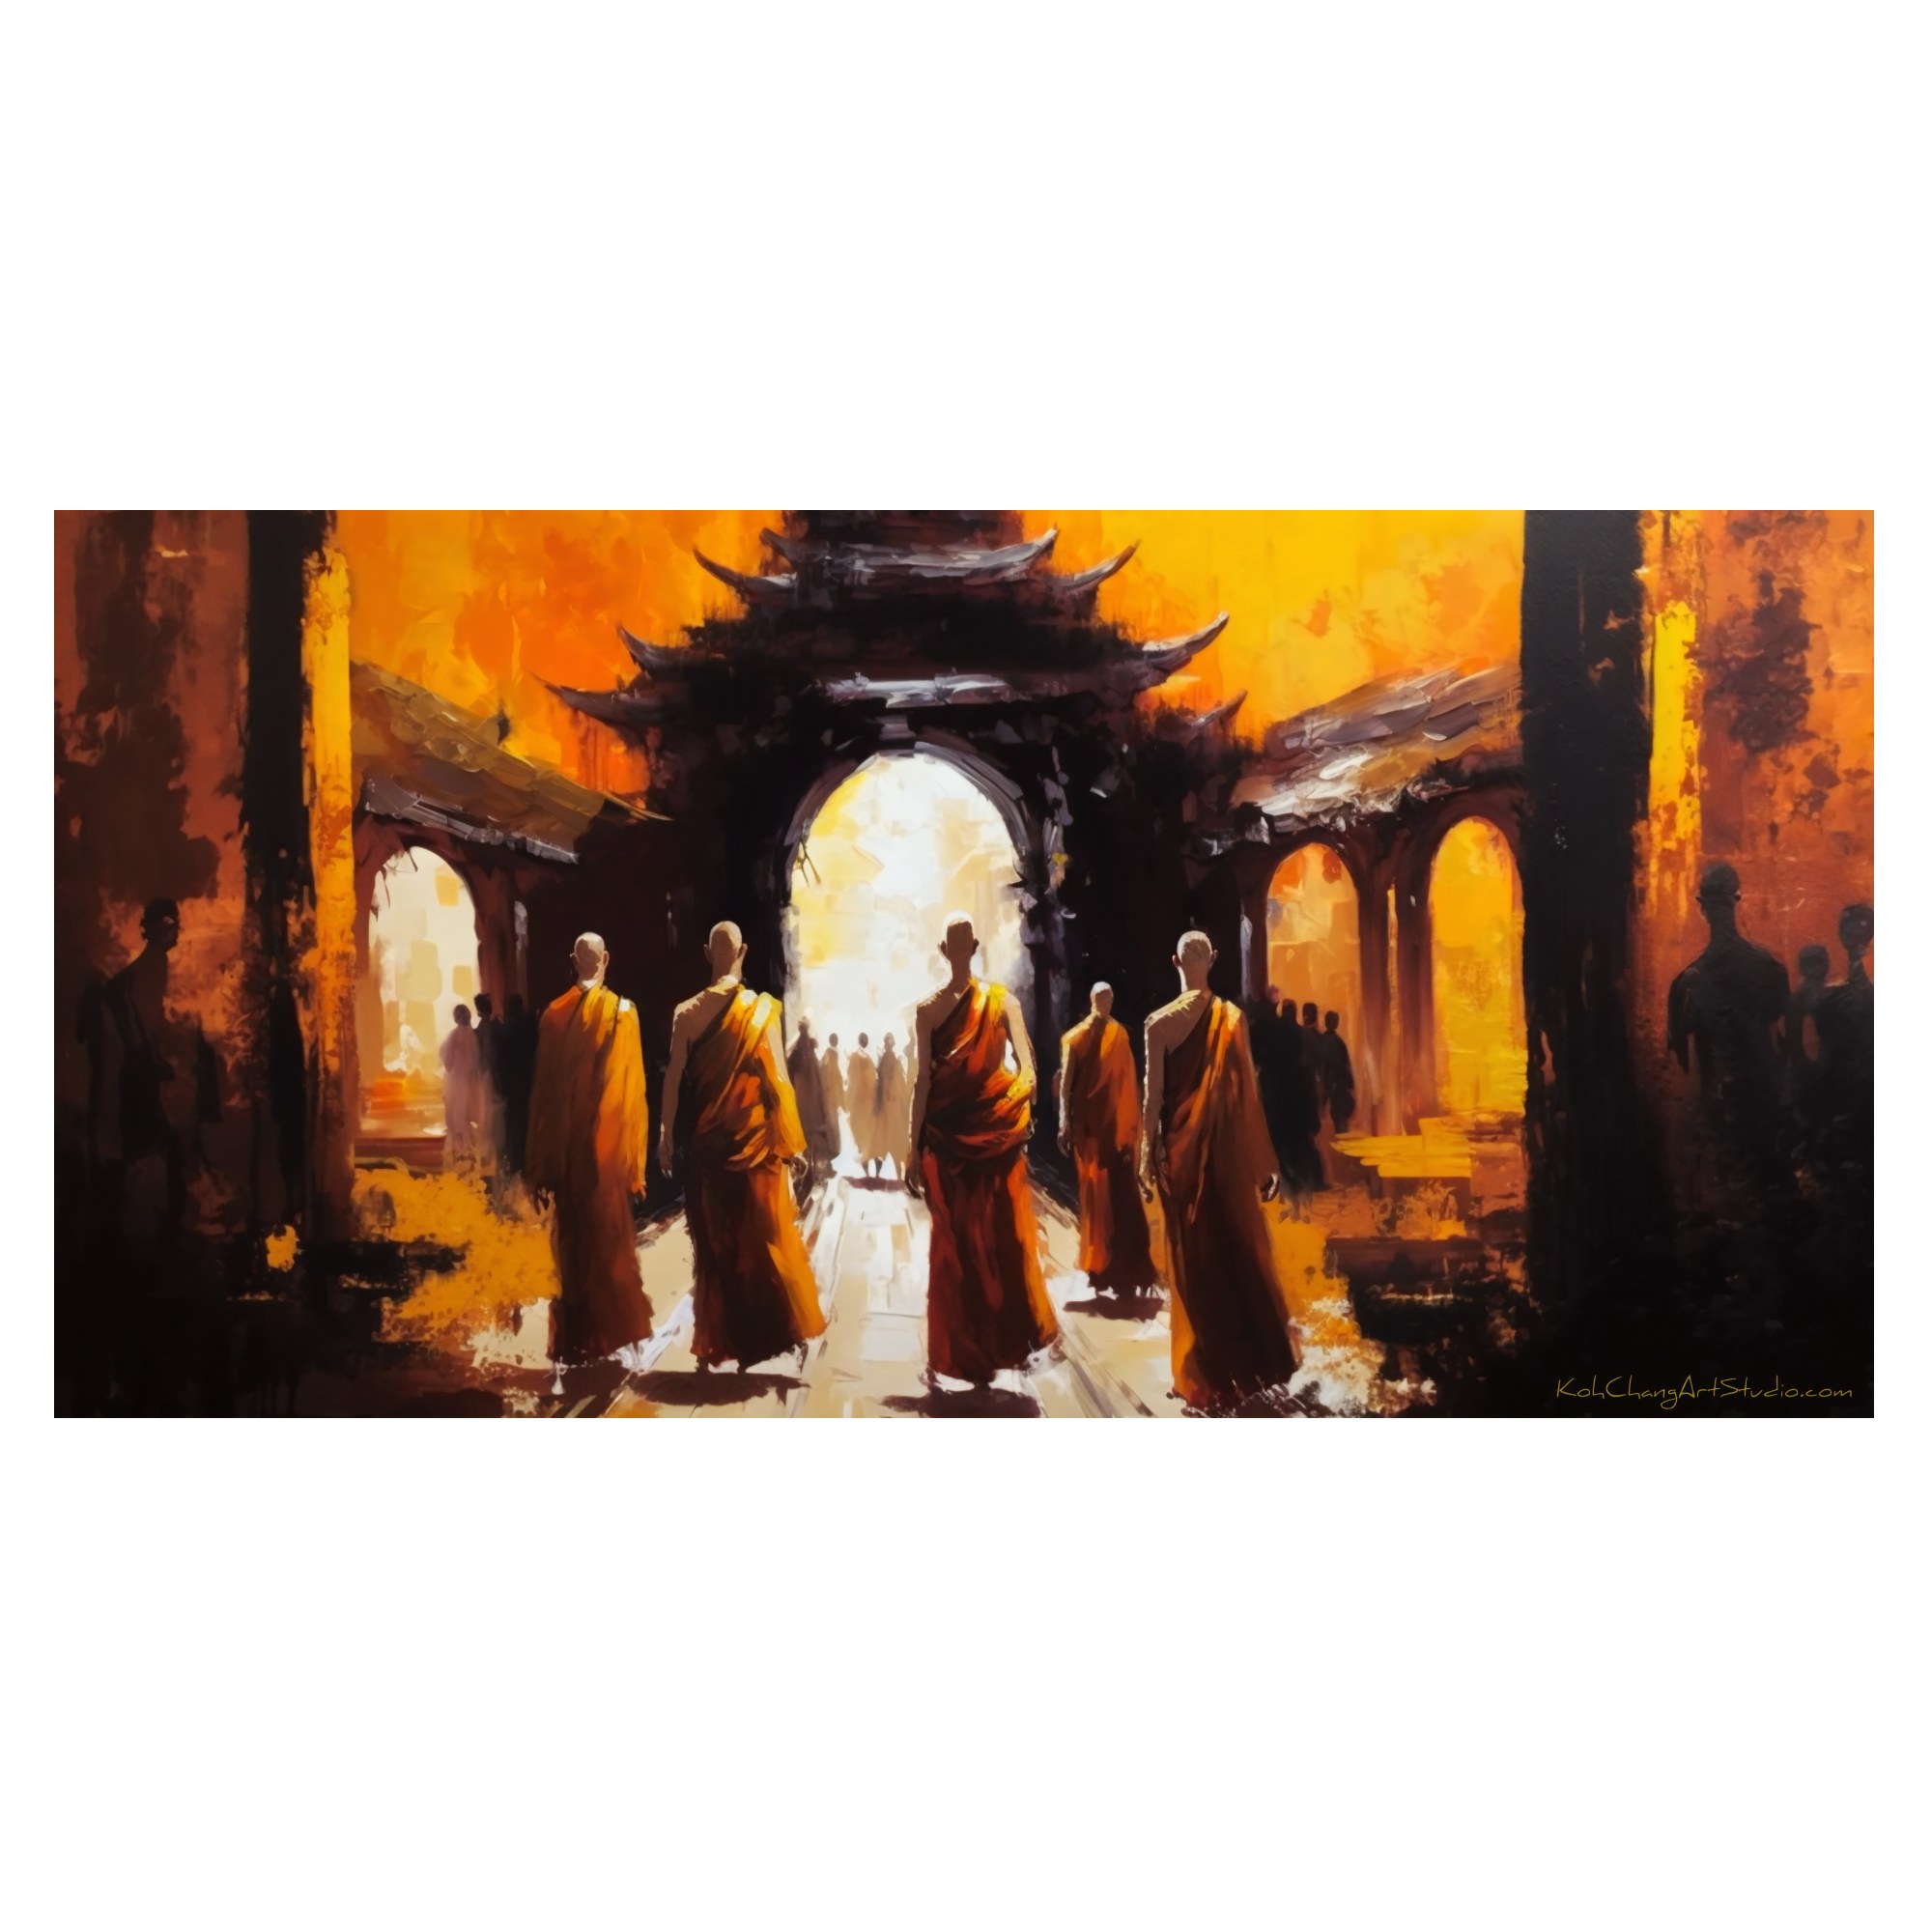 STEPS IN SERENITY Image - Temple teeming with silhouettes, capturing a moment of serenity.